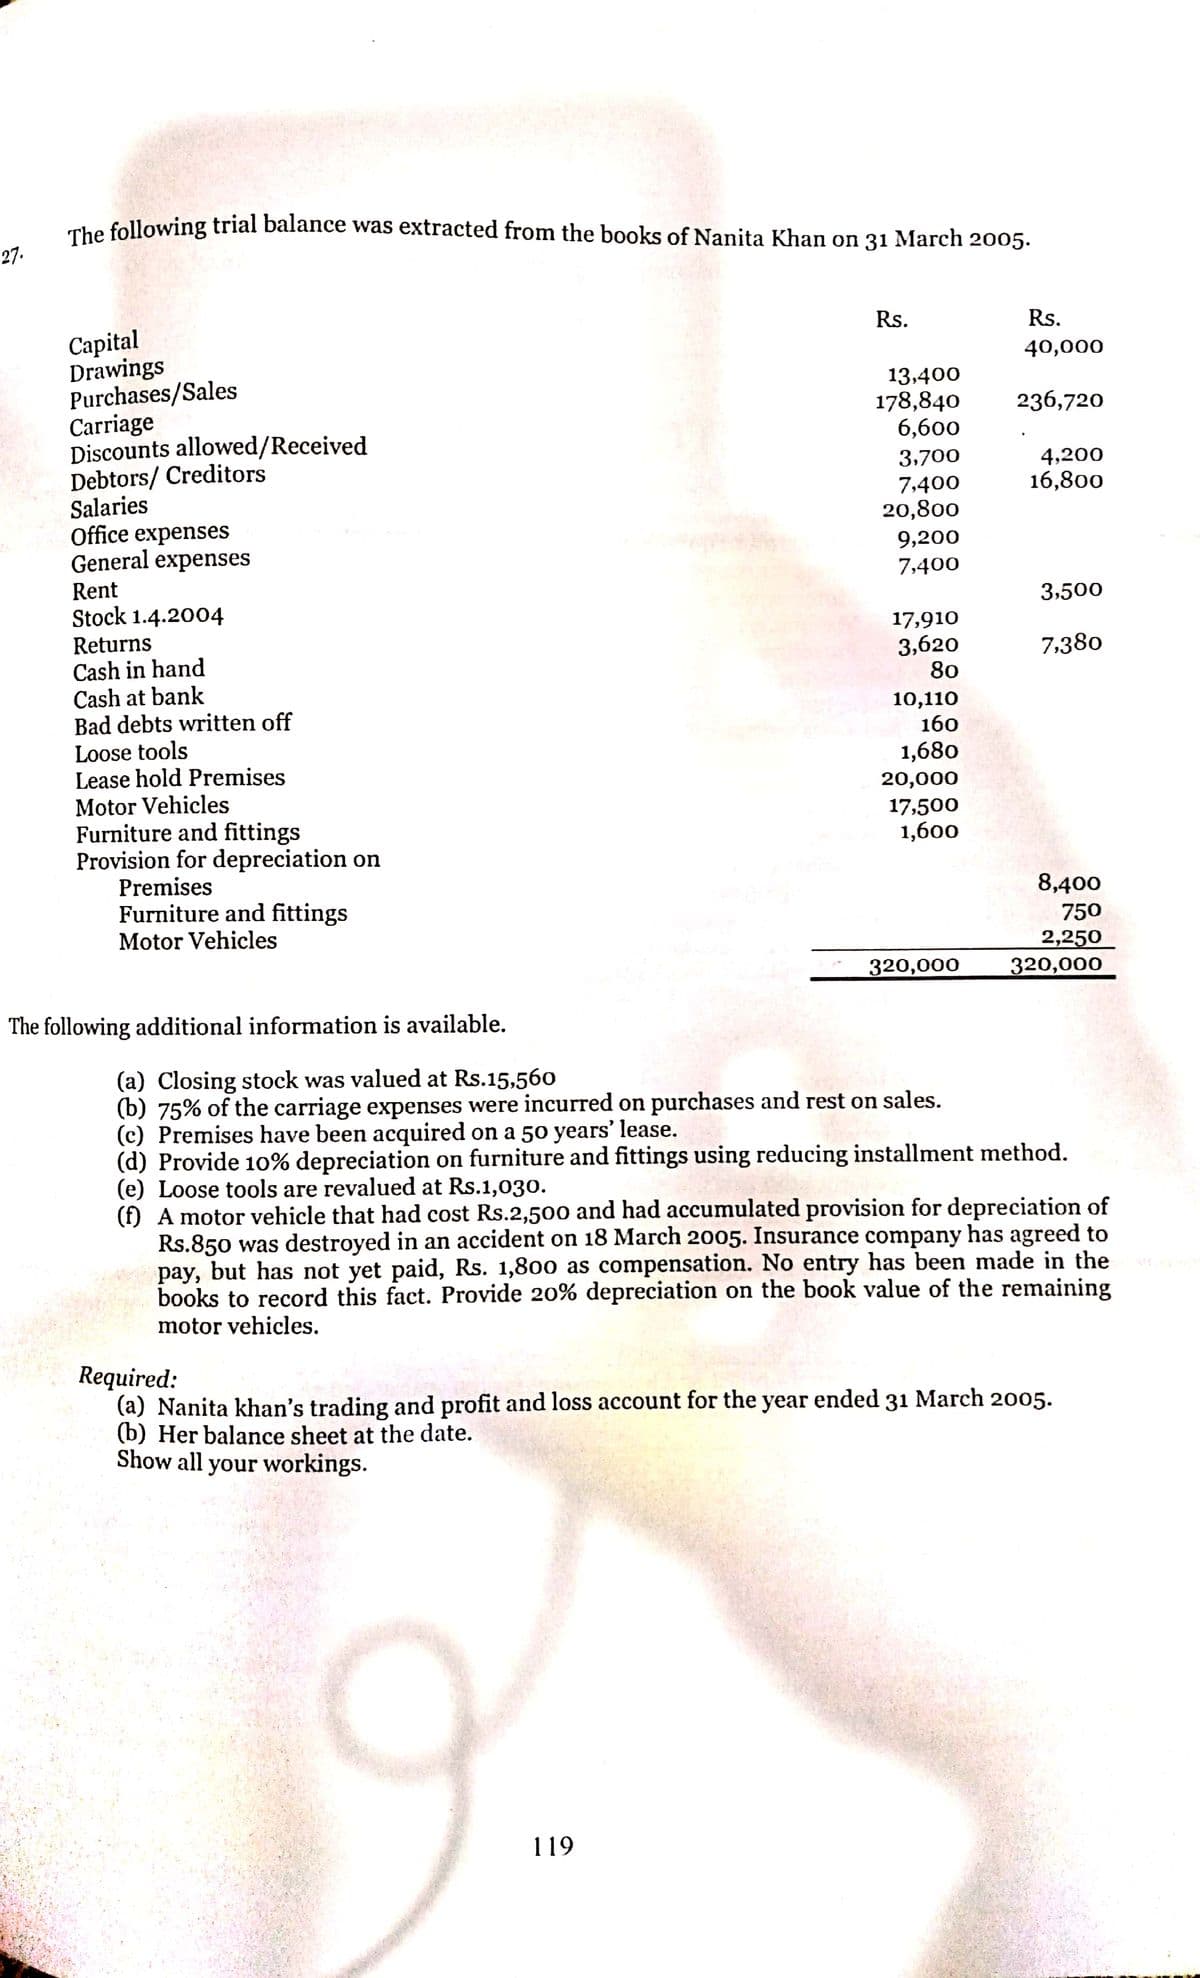 27.
The following trial balance was extracted from the books of Nanita Khan on 31 March 2005.
Capital
Drawings
Purchases/Sales
Carriage
Discounts allowed/Received
Debtors/ Creditors
Salaries
Office expenses
General expenses
Rent
Stock 1.4.2004
Returns
Cash in hand
Cash at bank
Bad debts written off
Loose tools
Lease hold Premises
Motor Vehicles
Furniture and fittings
Provision for depreciation on
Premises
Furniture and fittings
Motor Vehicles
The following additional information is available.
Rs.
13,400
178,840
6,600
3,700
7,400
20,800
9,200
7,400
17,910
3,620
80
119
10,110
160
1,680
20,000
17,500
1,600
320,000
(a) Closing stock was valued at Rs.15,560
(b) 75% of the carriage expenses were incurred on purchases and rest on sales.
(c) Premises have been acquired on a 50 years' lease.
Rs.
40,000
236,720
4,200
16,800
3,500
7,380
8,400
750
2,250
320,000
(d) Provide 10% depreciation on furniture and fittings using reducing installment method.
(e) Loose tools are revalued at Rs.1,030.
(f) A motor vehicle that had cost Rs.2,500 and had accumulated provision for depreciation of
Rs.850 was destroyed in an accident on 18 March 2005. Insurance company has agreed to
pay, but has not yet paid, Rs. 1,800 as compensation. No entry has been made in the
books to record this fact. Provide 20% depreciation on the book value of the remaining
motor vehicles.
Required:
(a) Nanita khan's trading and profit and loss account for the year ended 31 March 2005.
(b) Her balance sheet at the date.
Show all your workings.